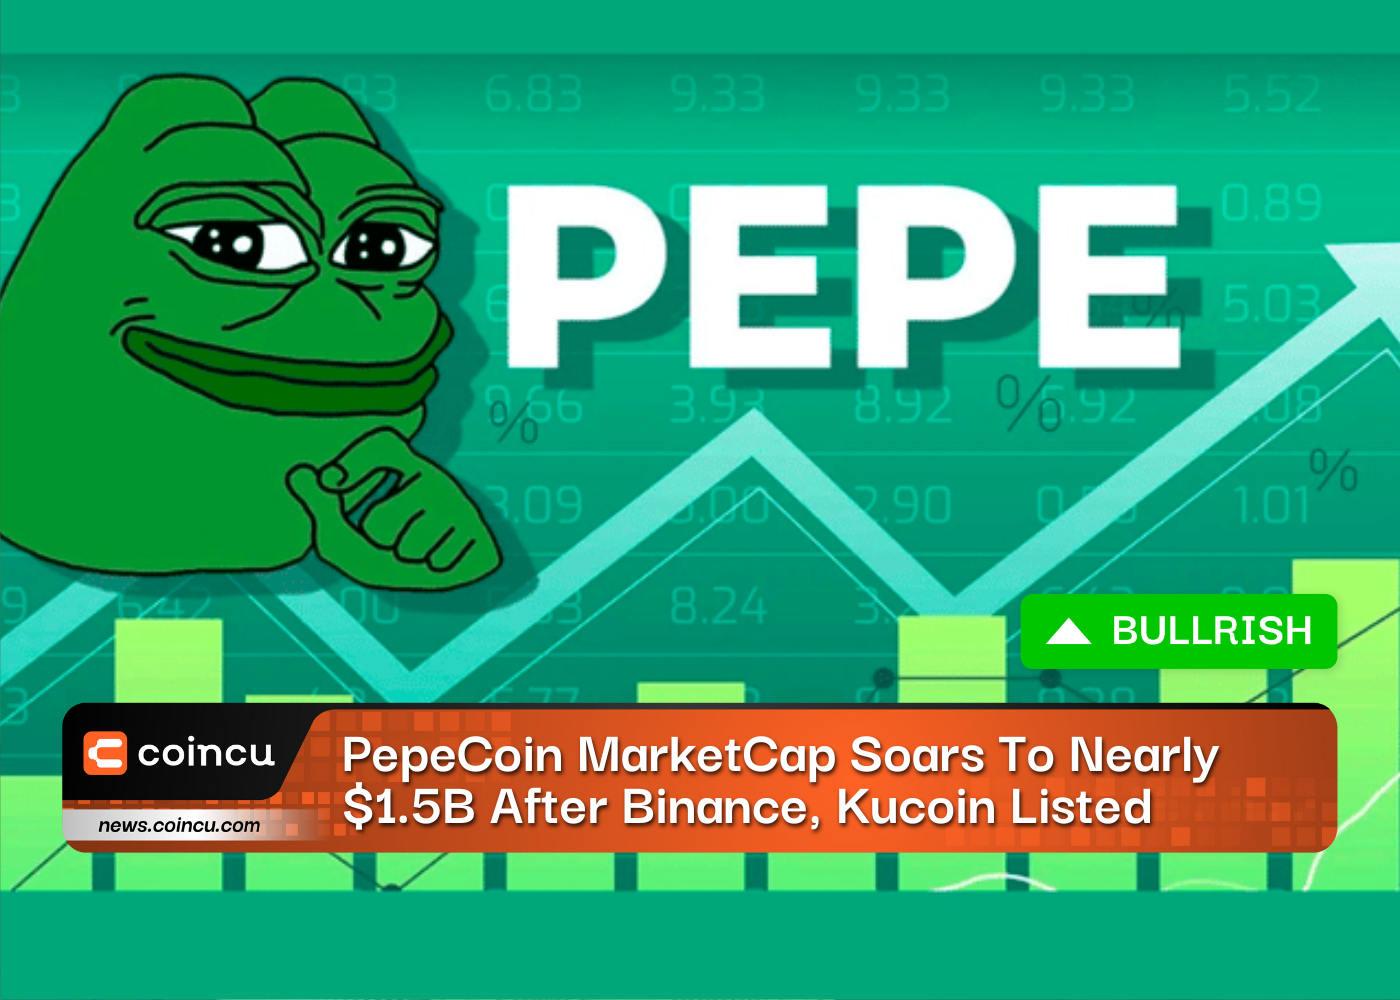 PepeCoin MarketCap Soars To Nearly $1.5B After Binance, Kucoin Listed